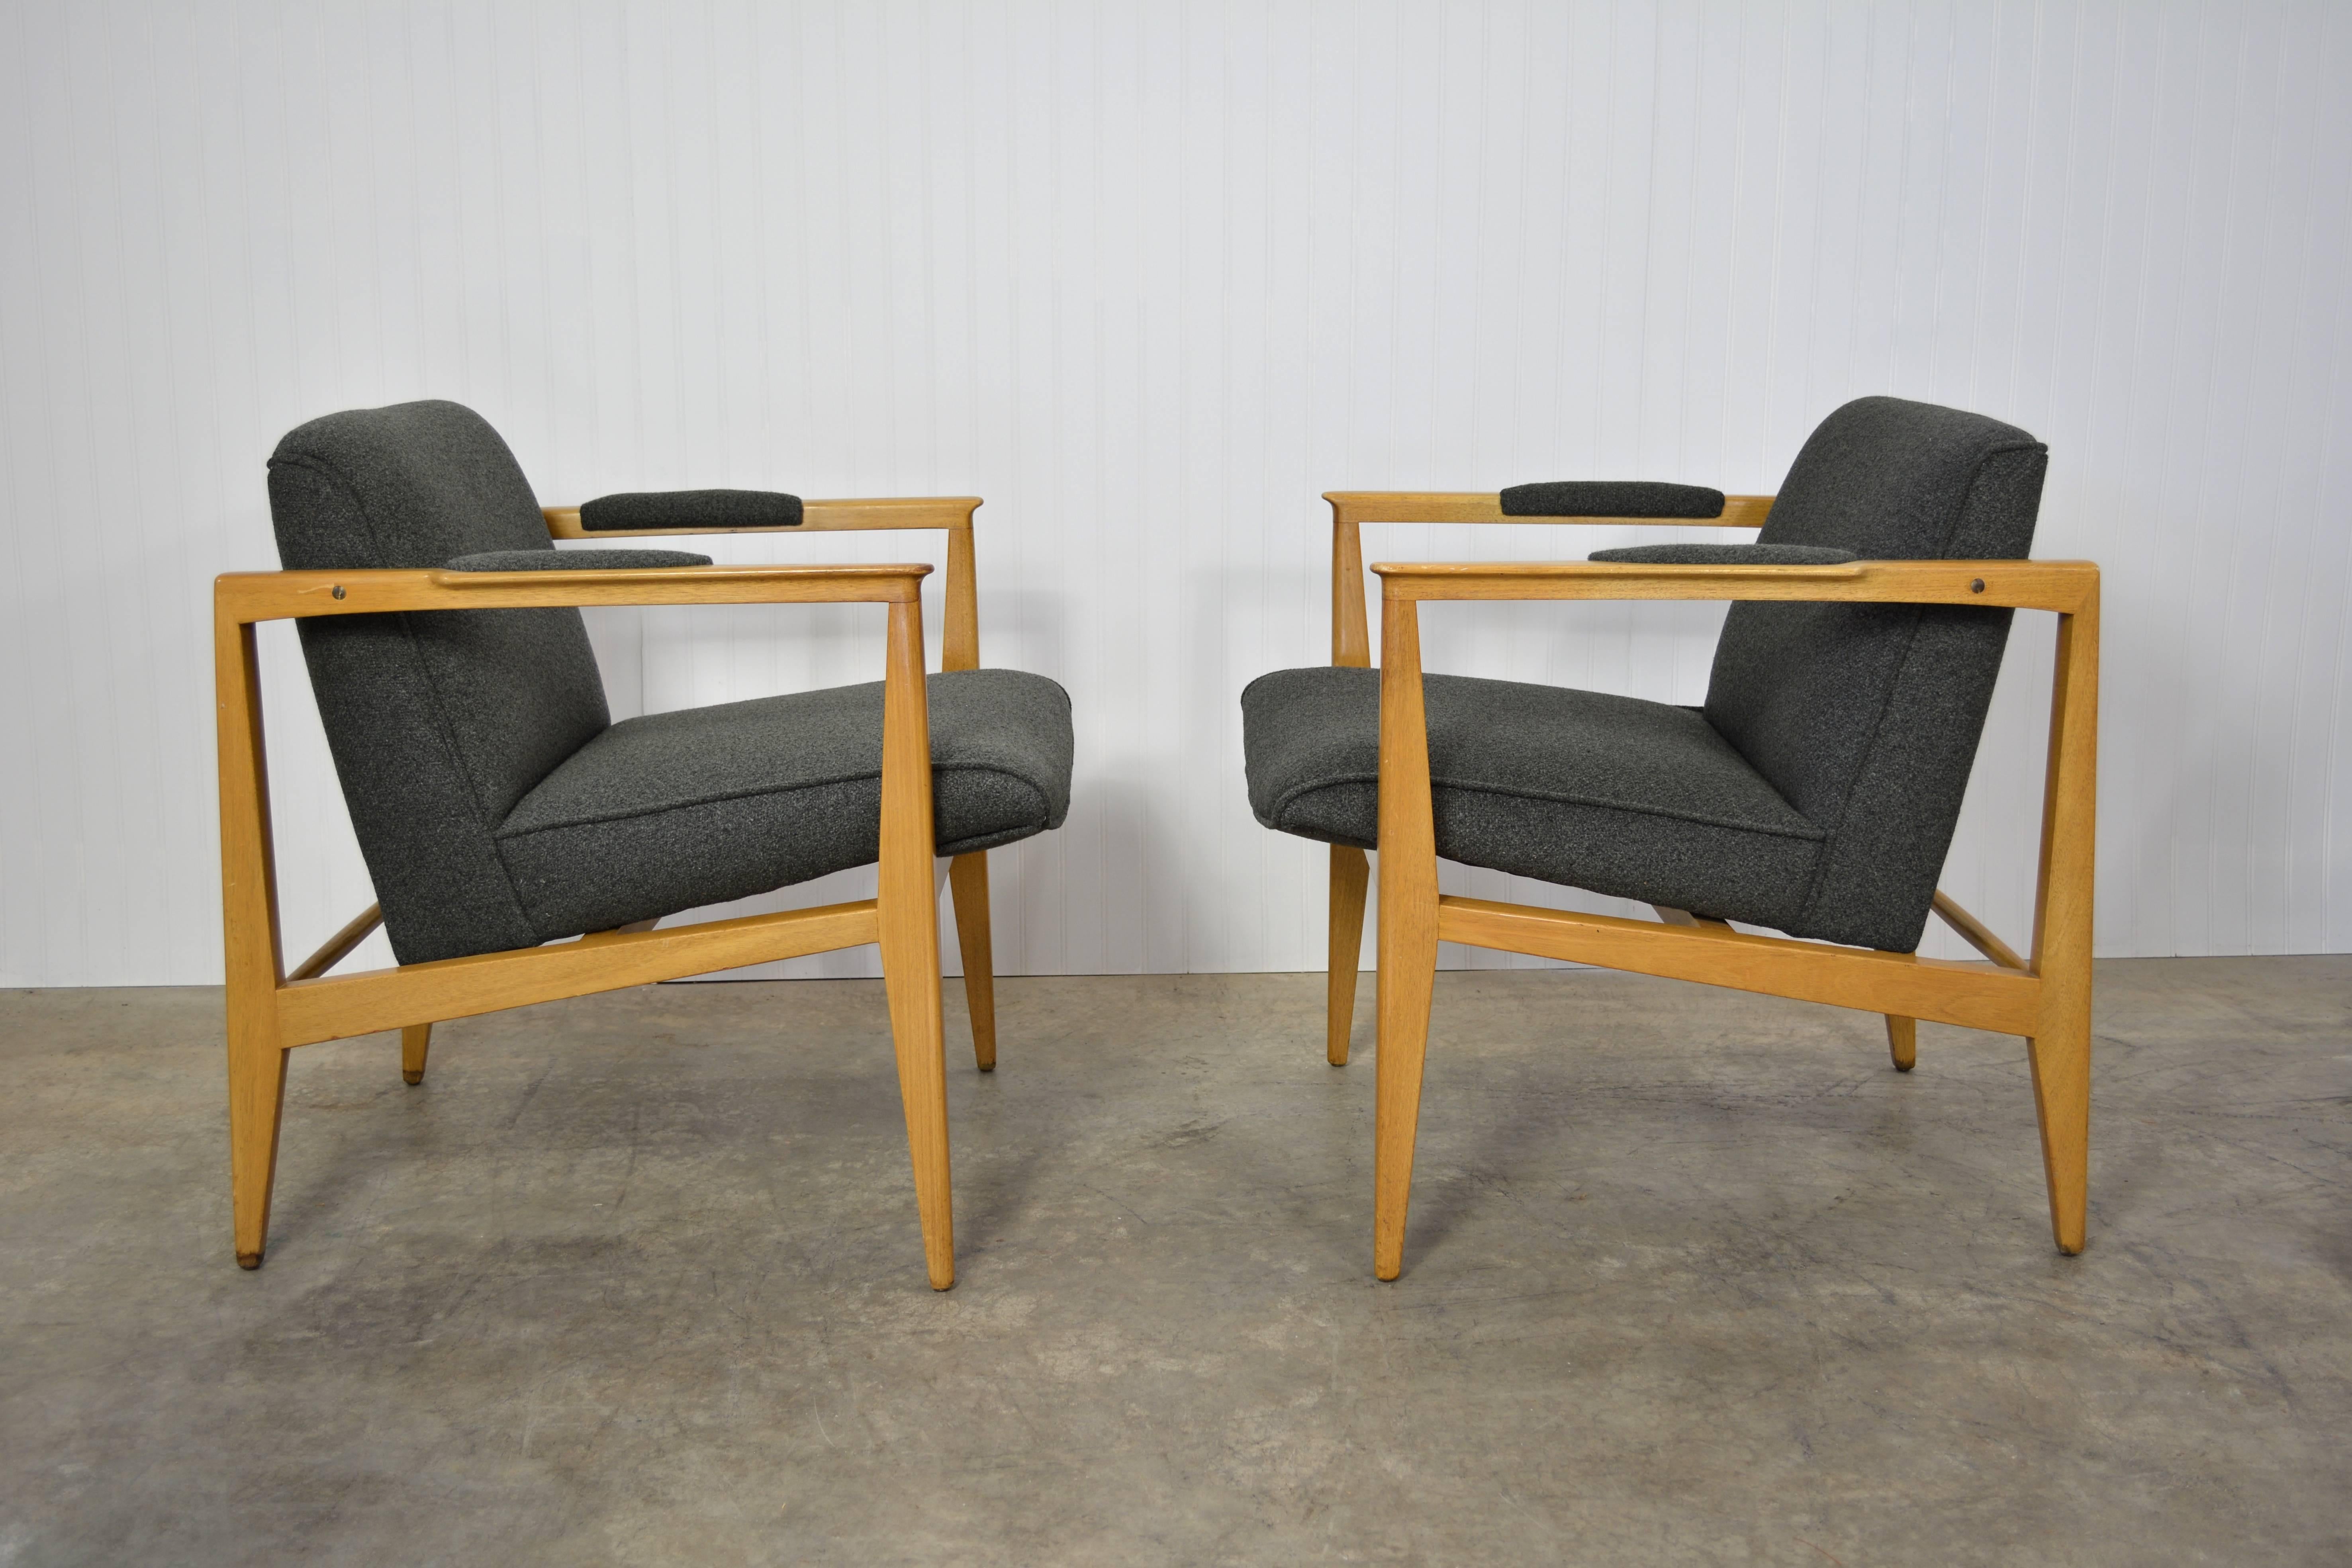 A pair of lounge chairs designed by Edward Wormley for Dunbar. Bleached mahogany frames and charcoal grey upholstery. Both chairs labeled.